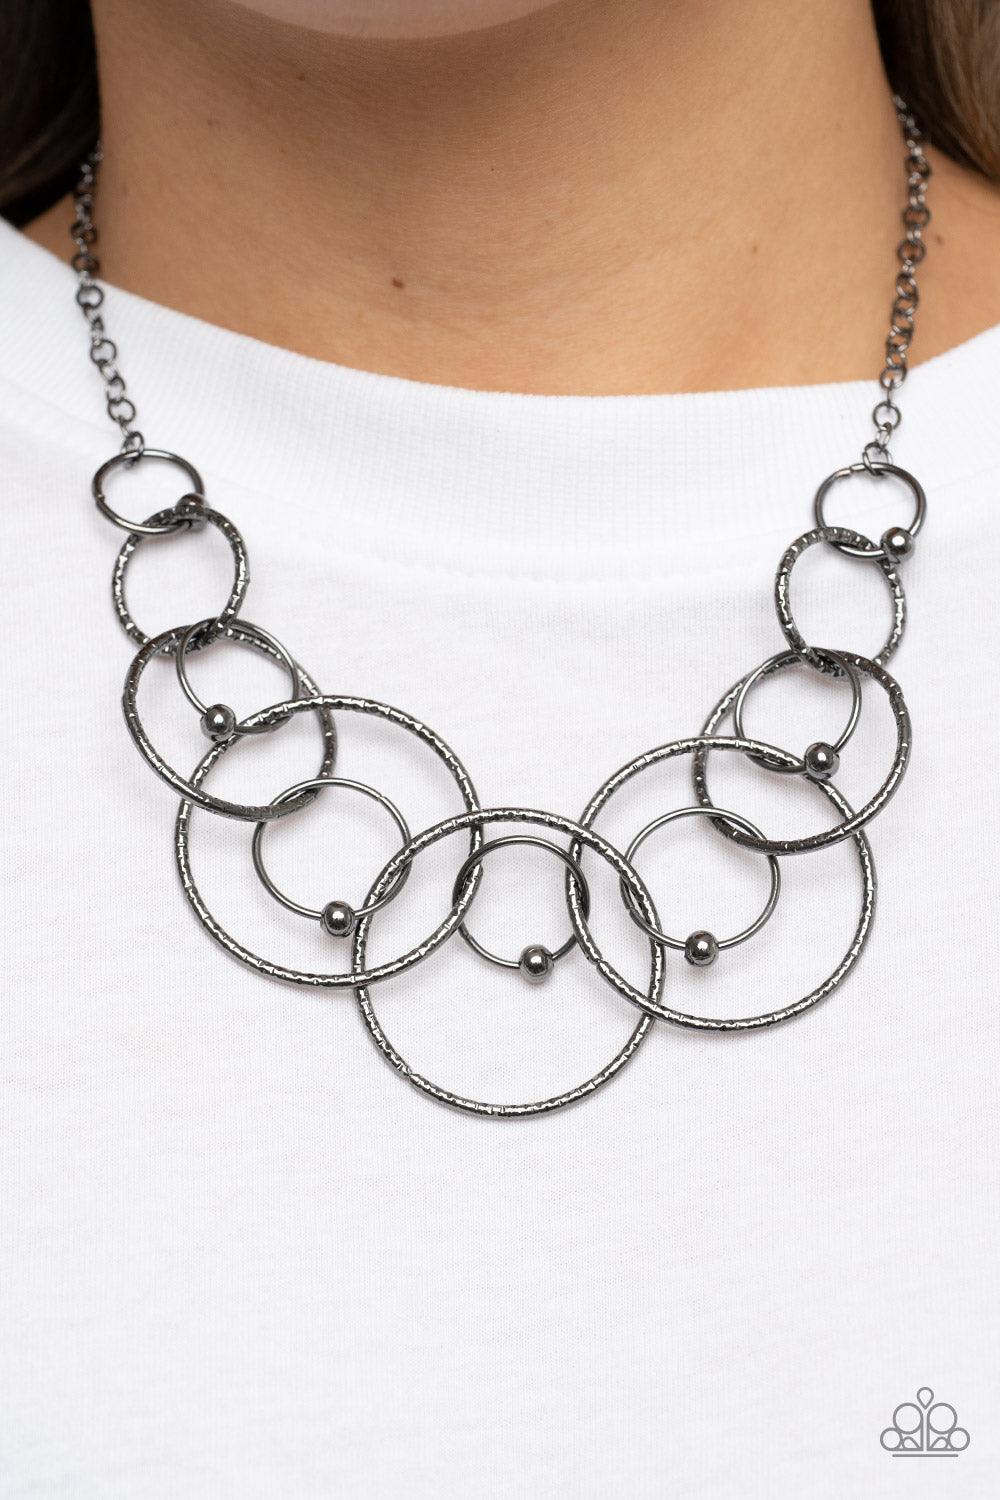 Encircled in Elegance Black Necklace - Jewelry by Bretta